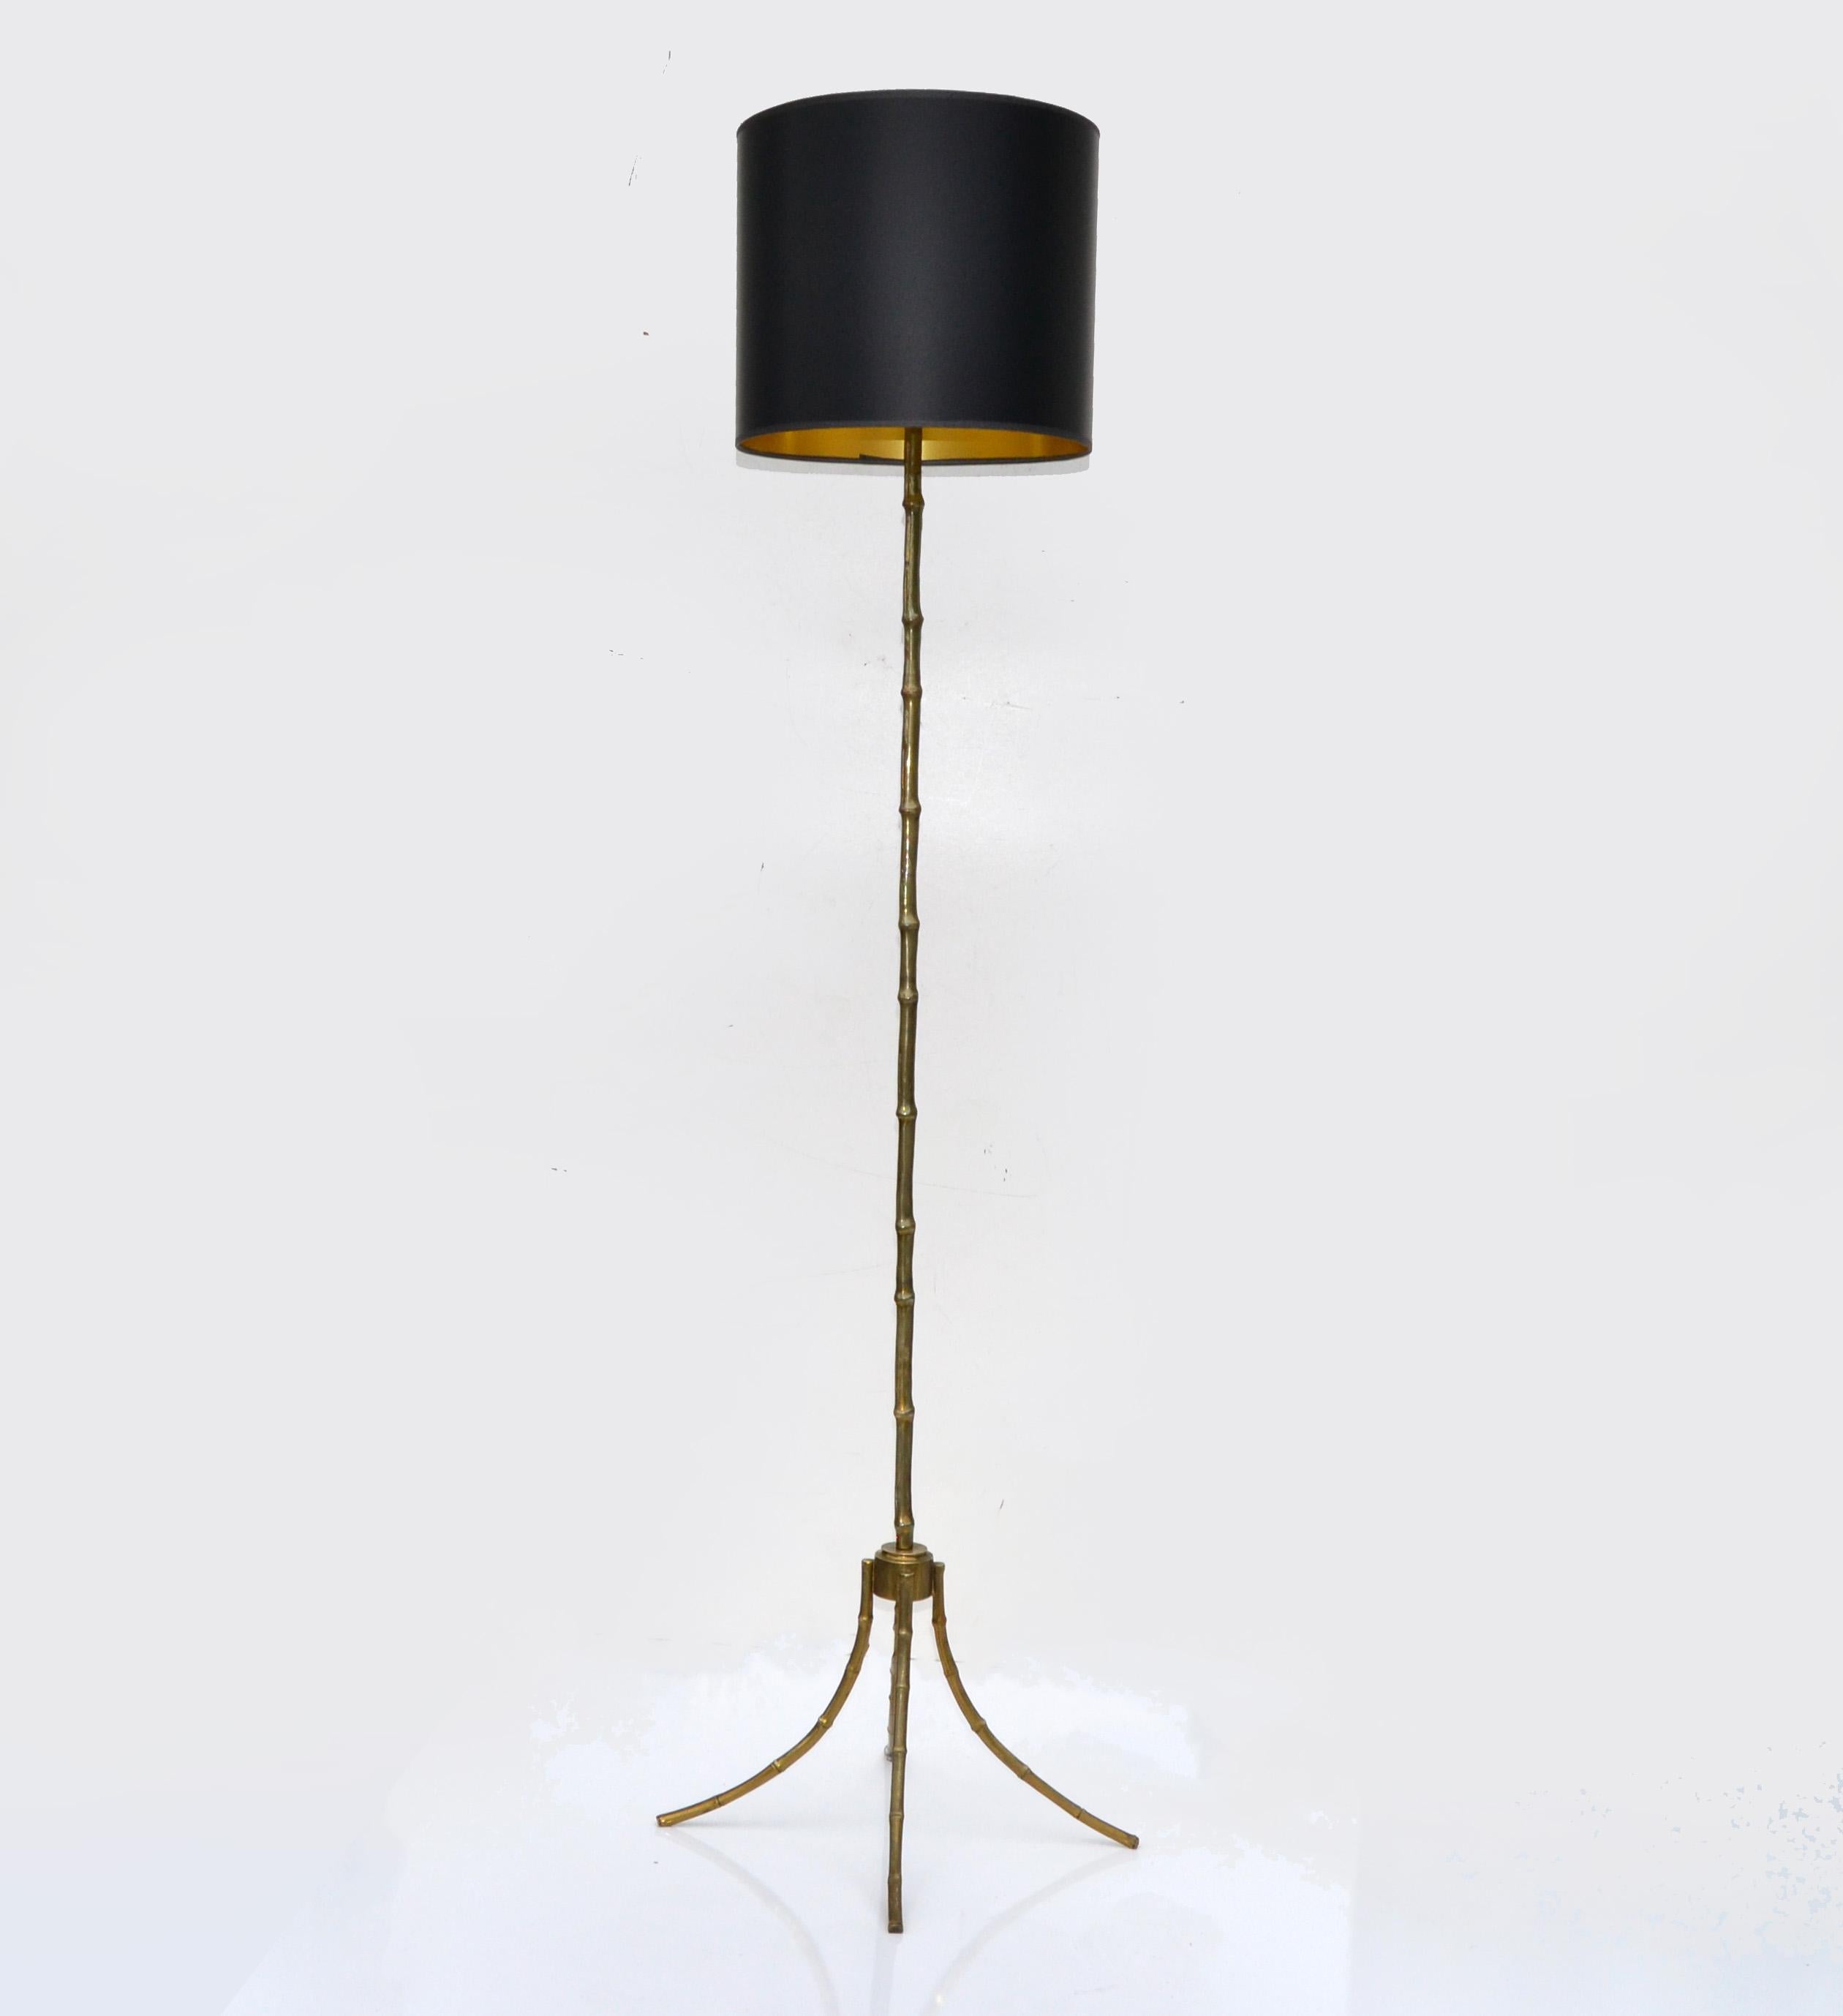 French Maison Baguès Bronze Floor Lamp France Neoclassical Black & Gold Shade 1950 For Sale